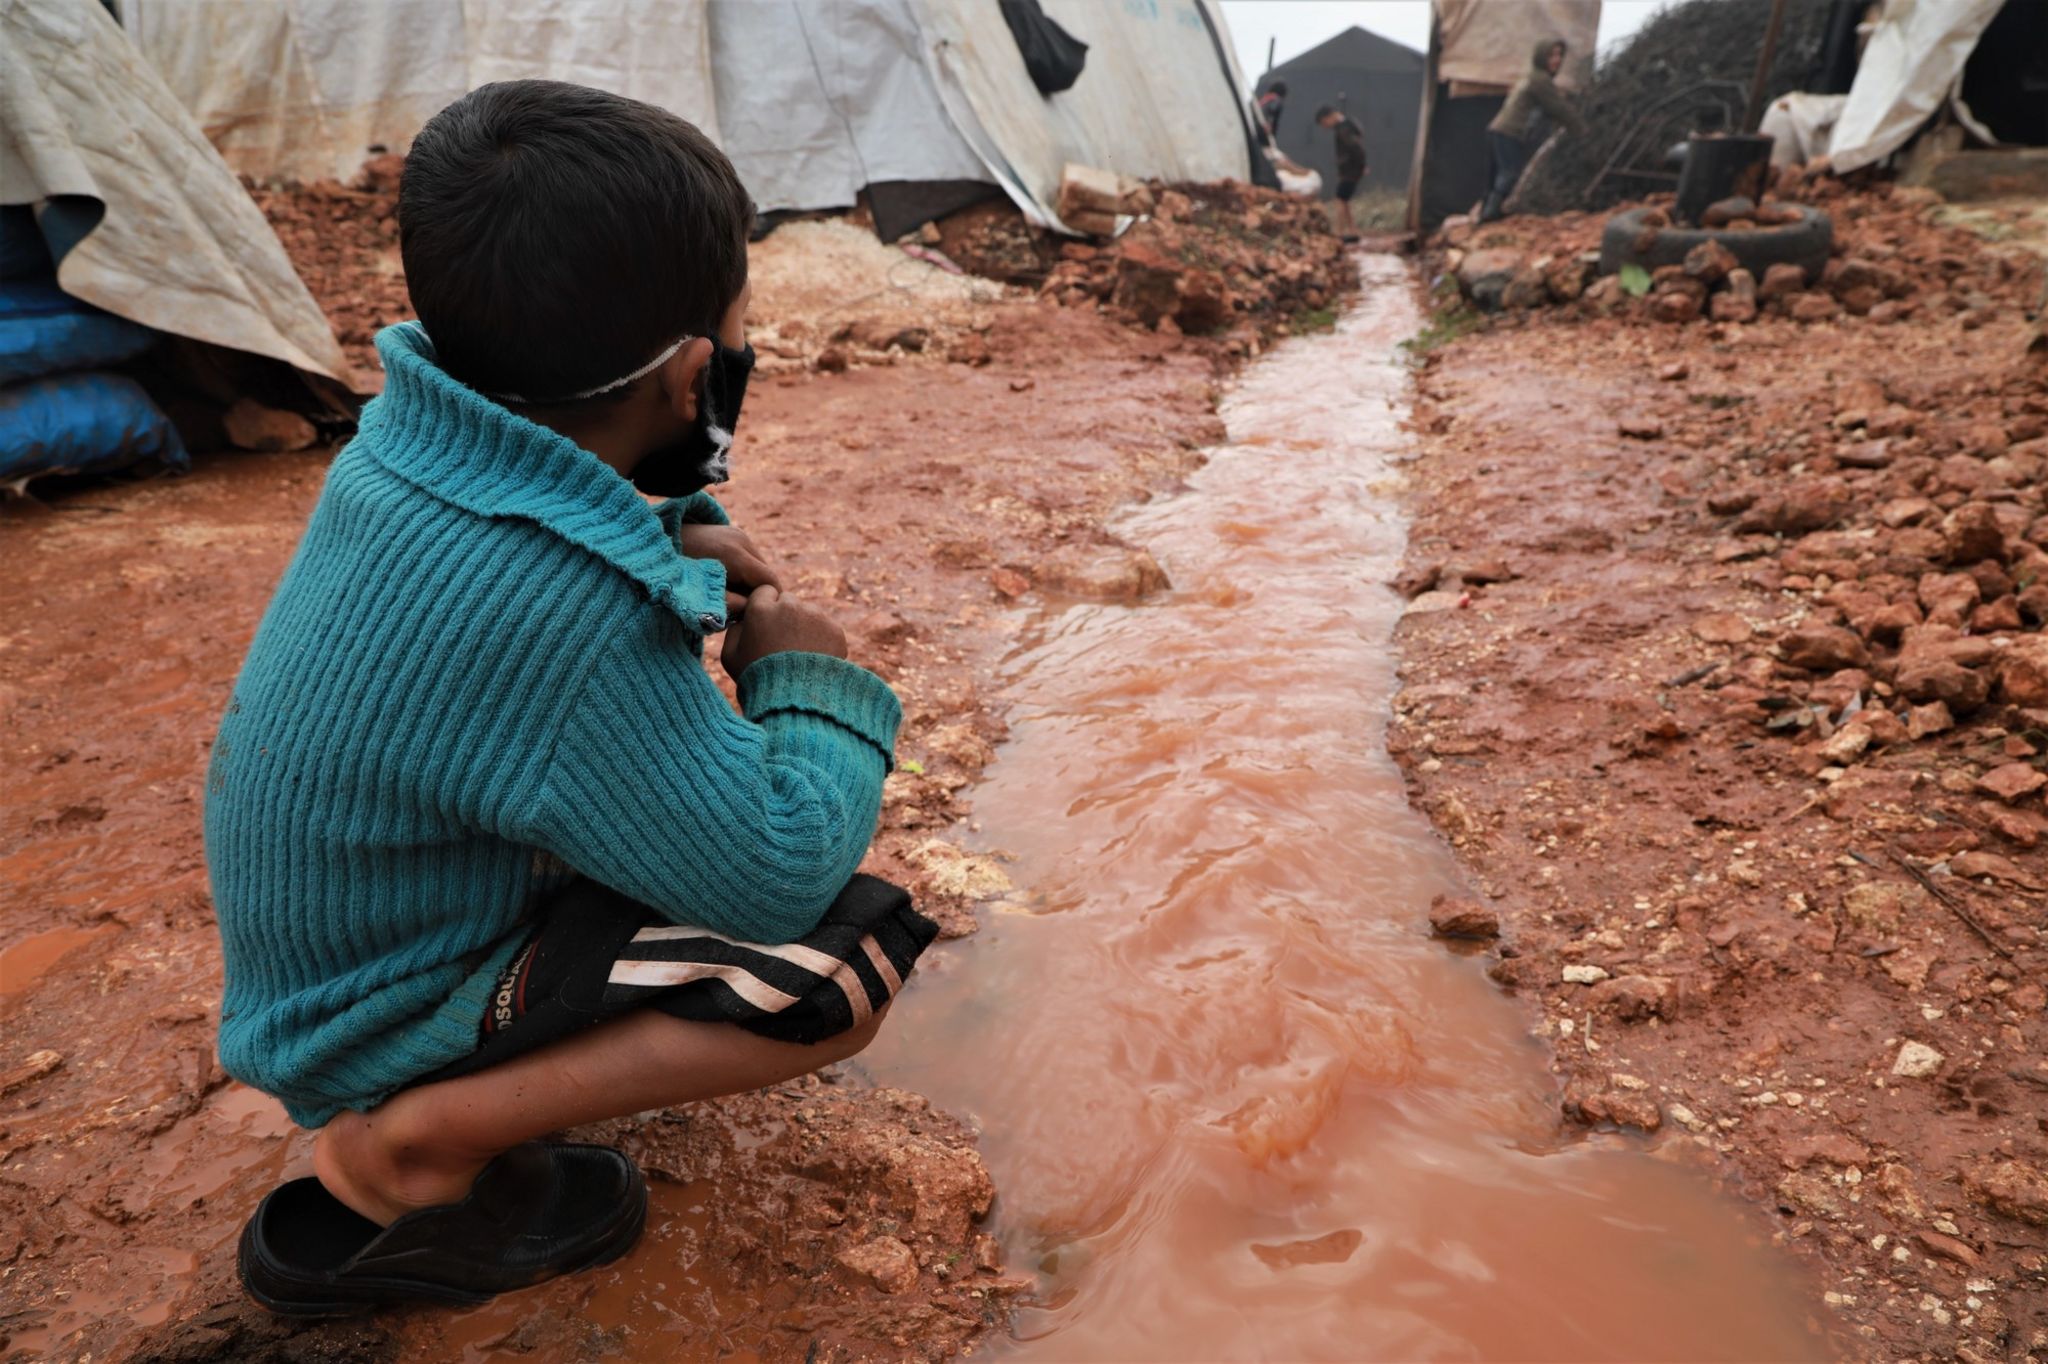 A boy looks at a water channel through a camp for displaced people in north-western Syria